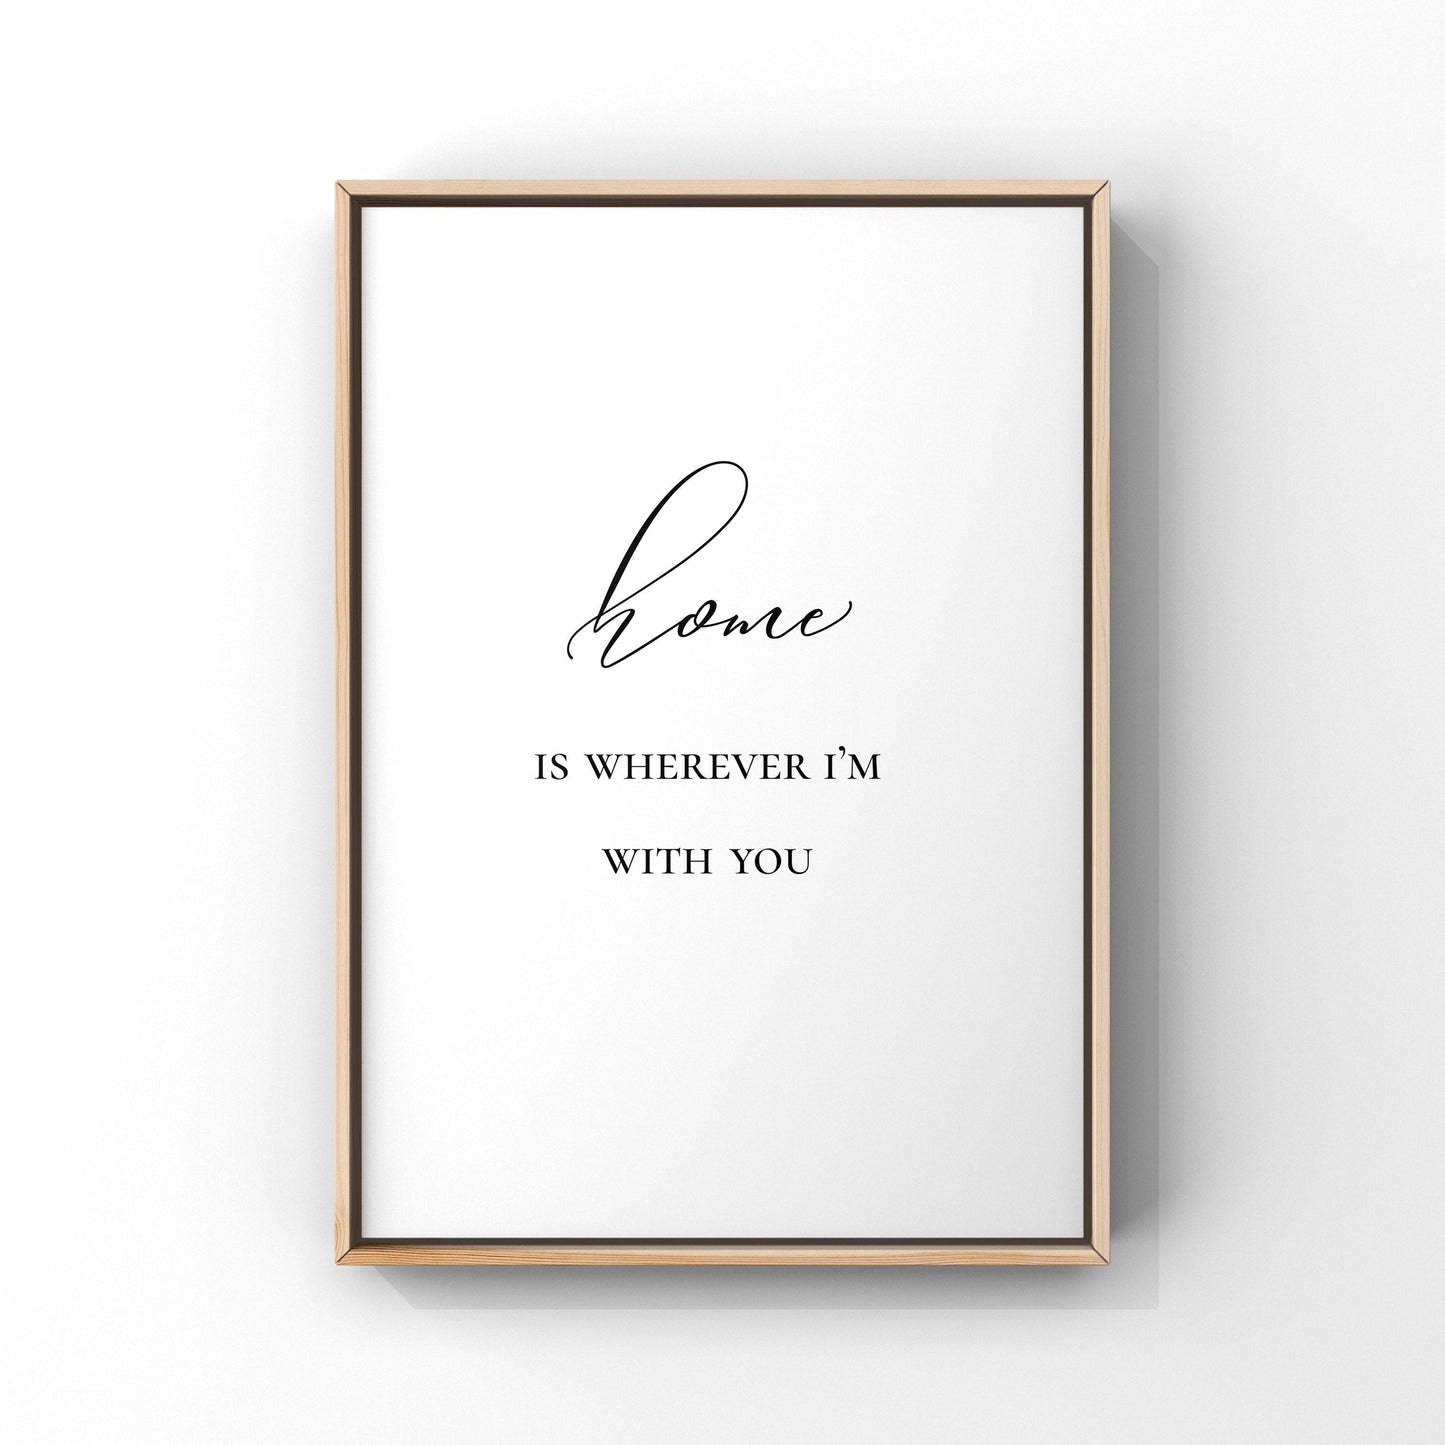 Home is wherever I’m with you,Quote print, Entryway decor,Living room wall art,Housewarming gift,Quote print poster,Home wall decor